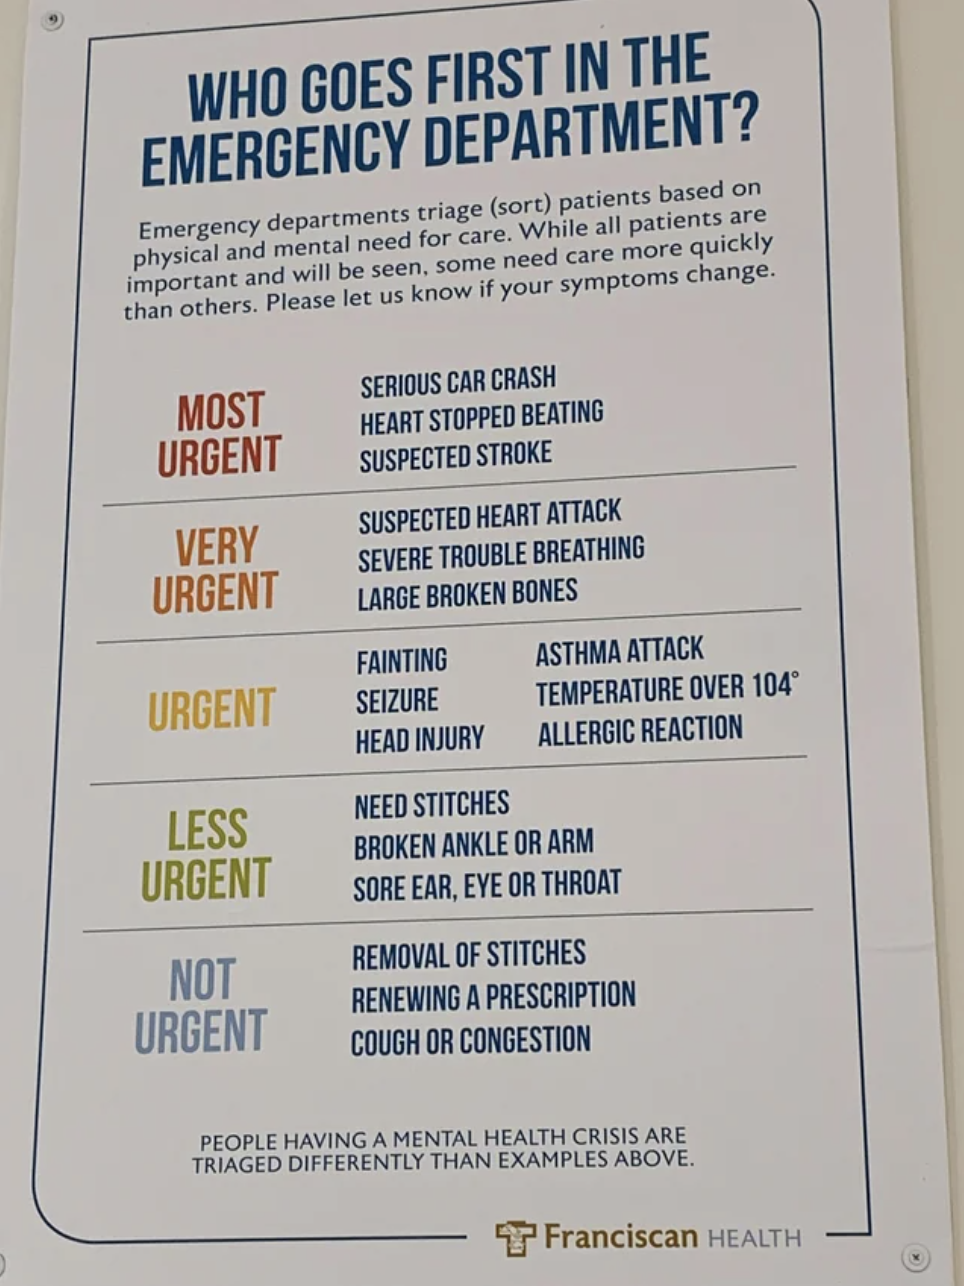 A chart showing the priority of patients being seen an the ER